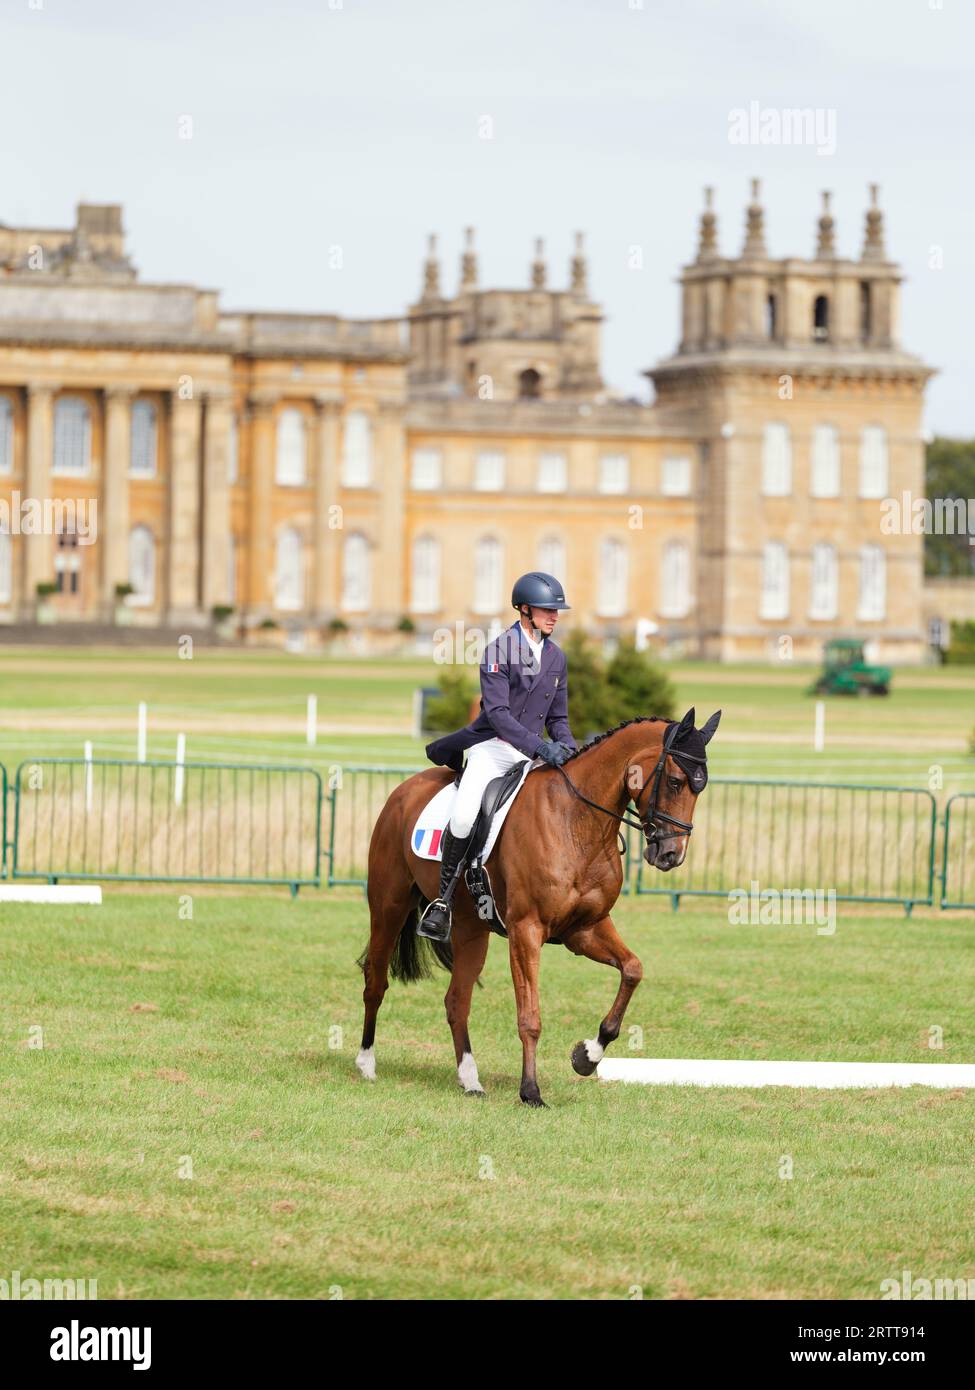 Gaspard Maksud of France with Kan-Do 2 during the dressage test at the Blenheim Palace International Horse Trials on September 14, 2023, United Kingdom (Photo by Maxime David/MXIMD Pictures - mximd.com) Stock Photo